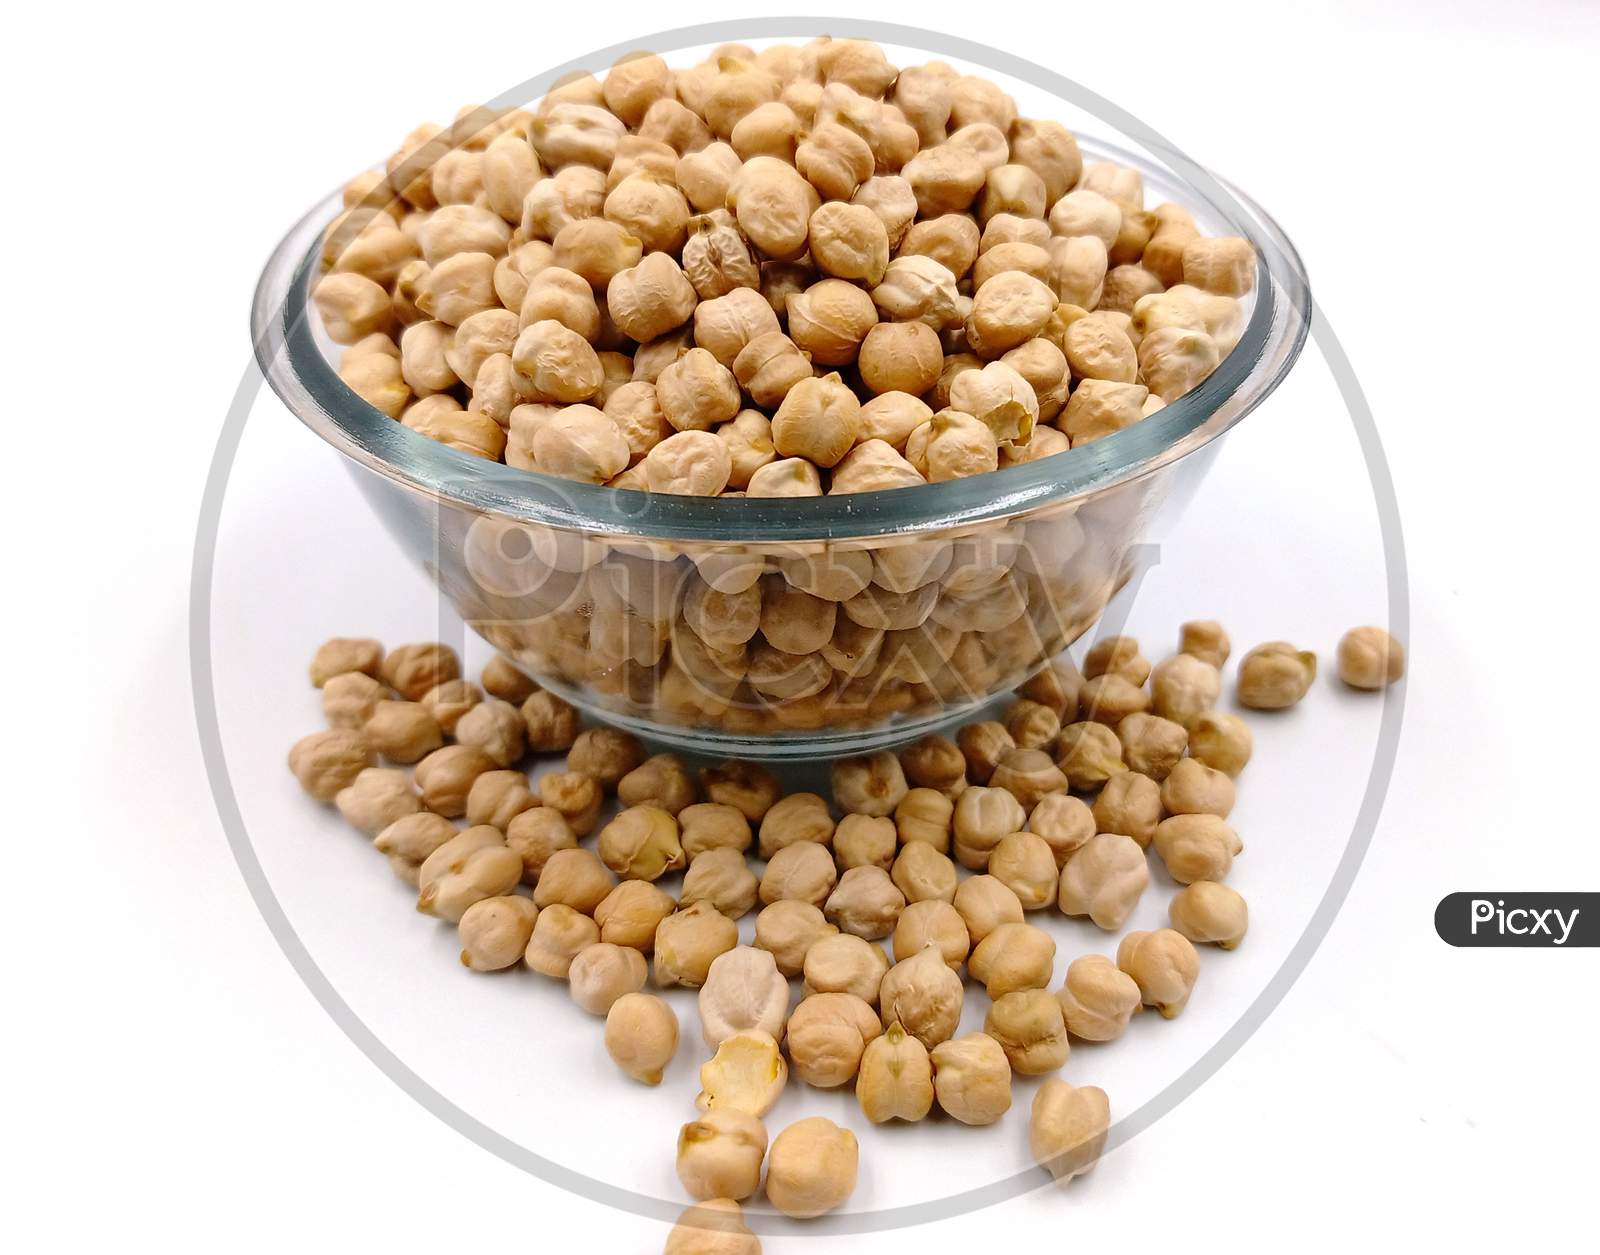 chickpeas in glass bowl on white background